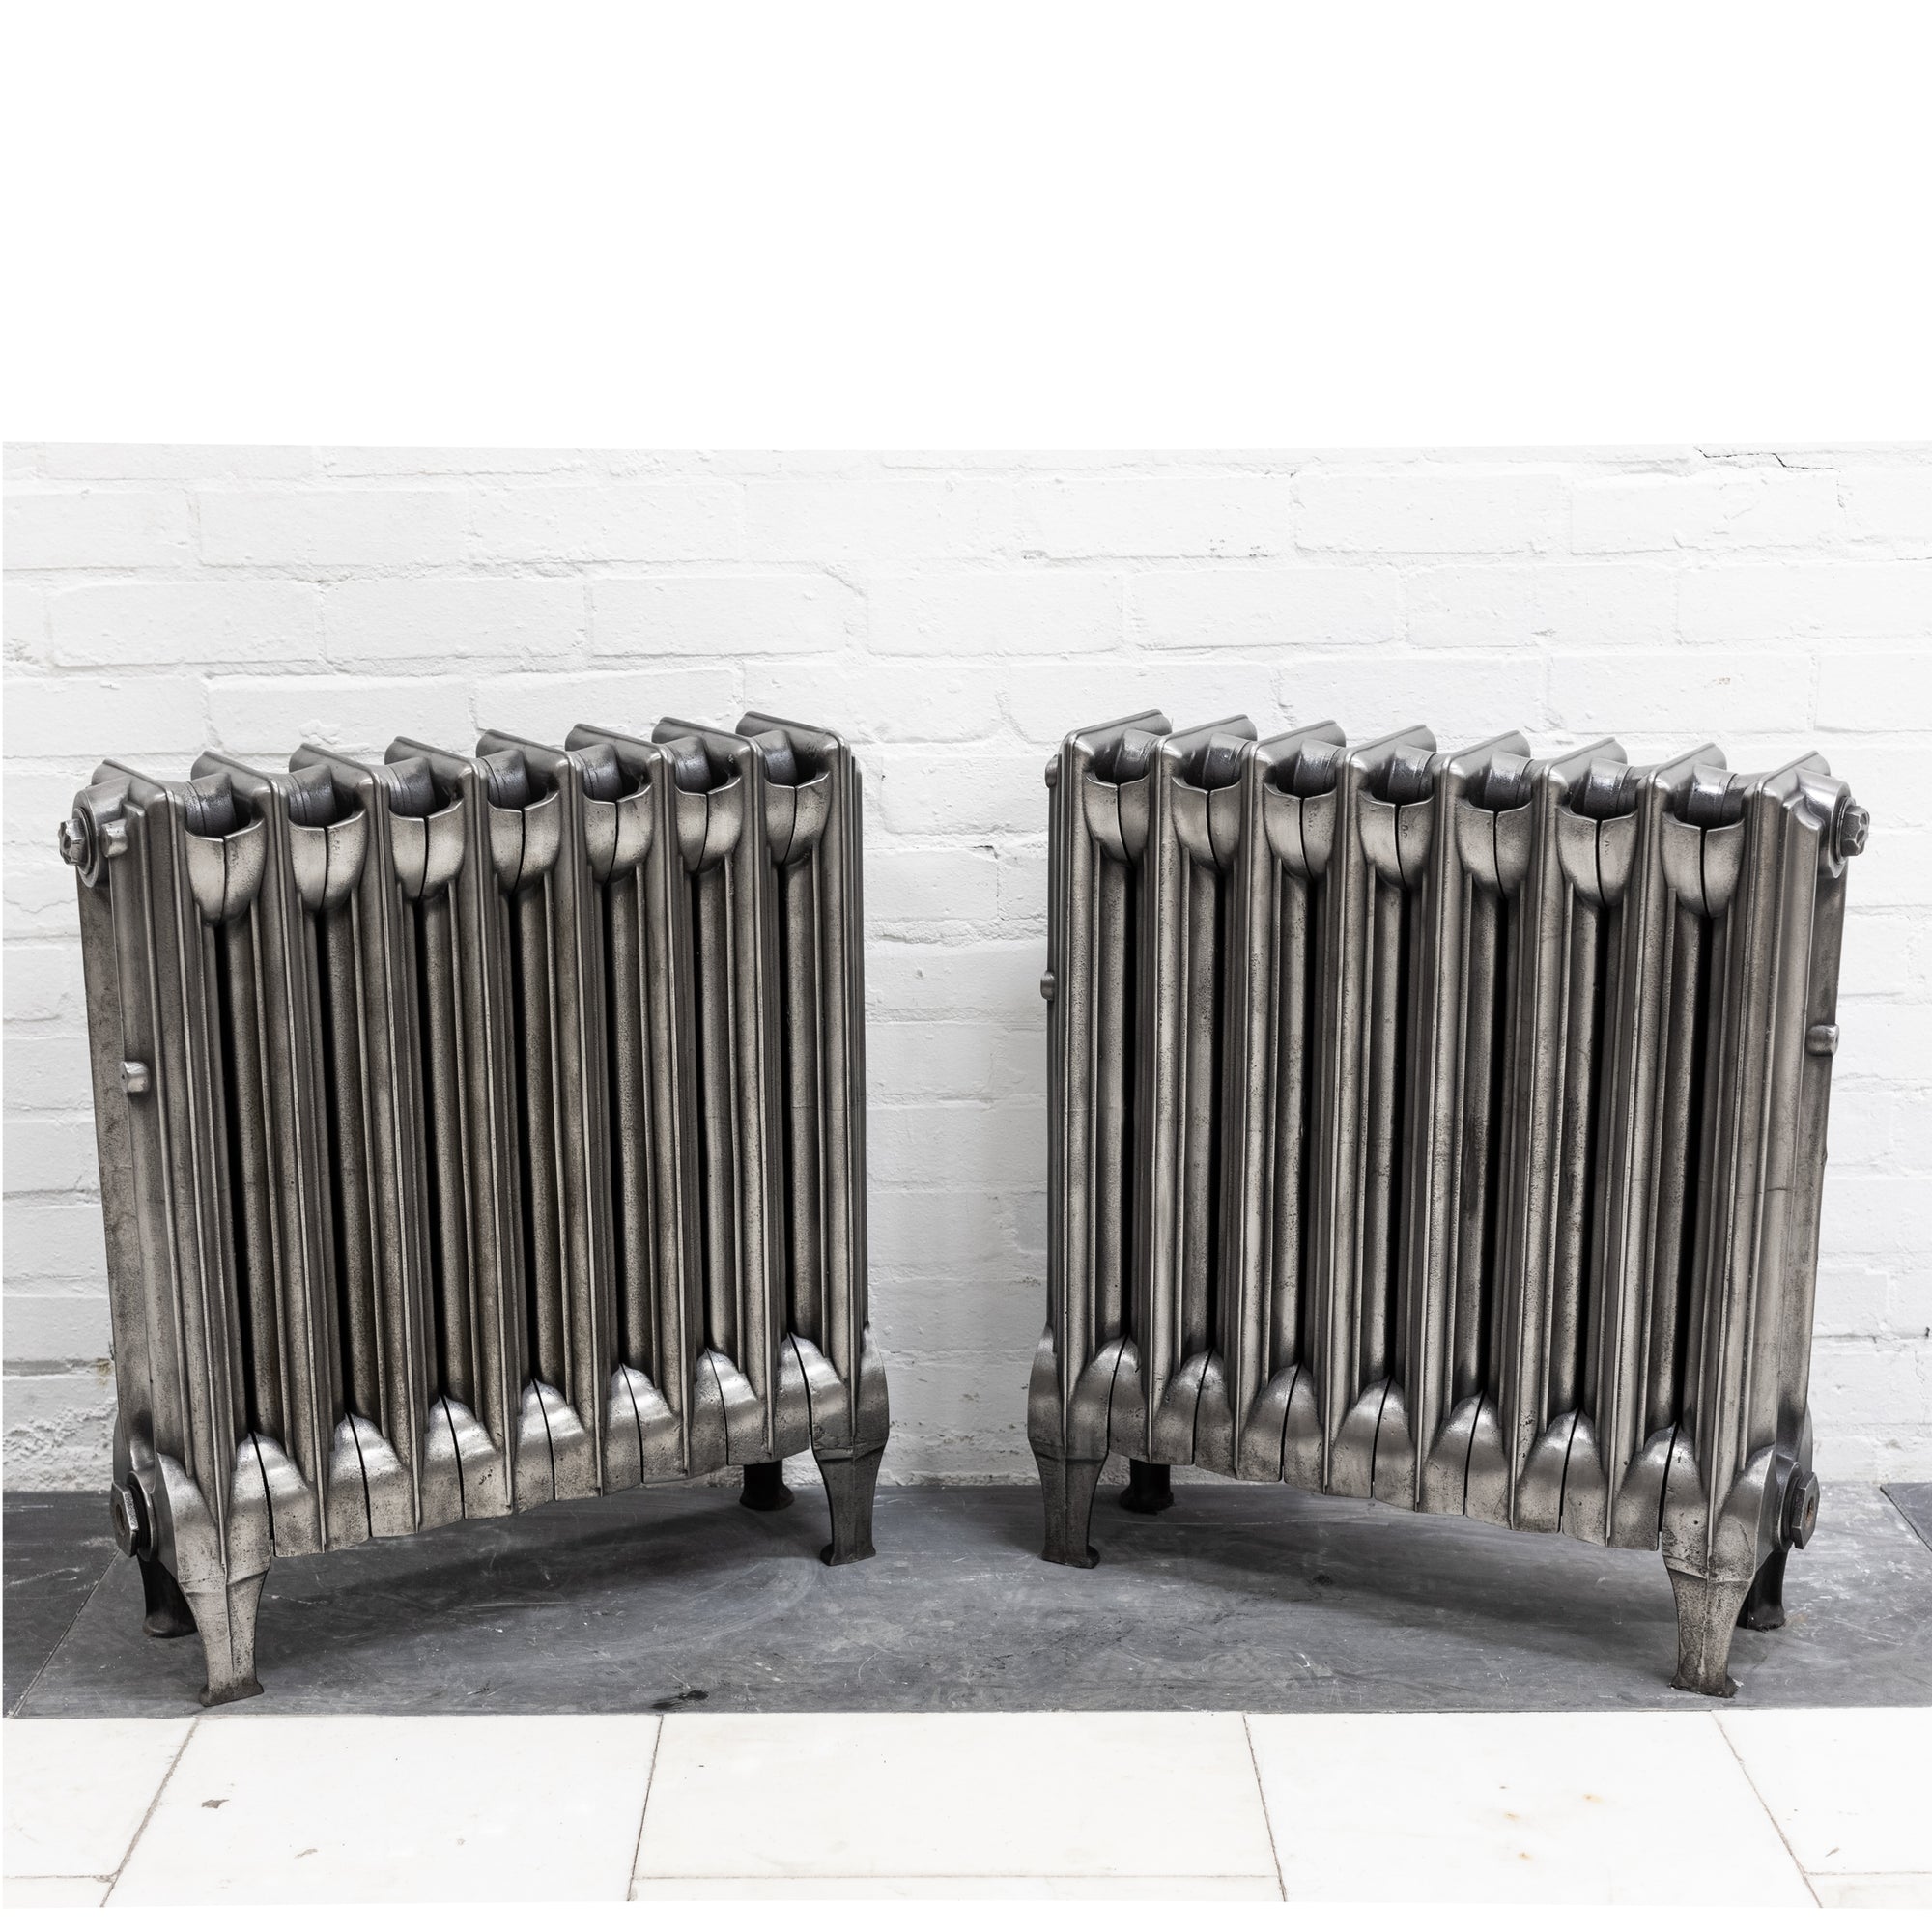 Rare Art Deco Cast Iron Radiator Reclaimed from Mercers Hall | 2 Avaliable | The Architectural Forum